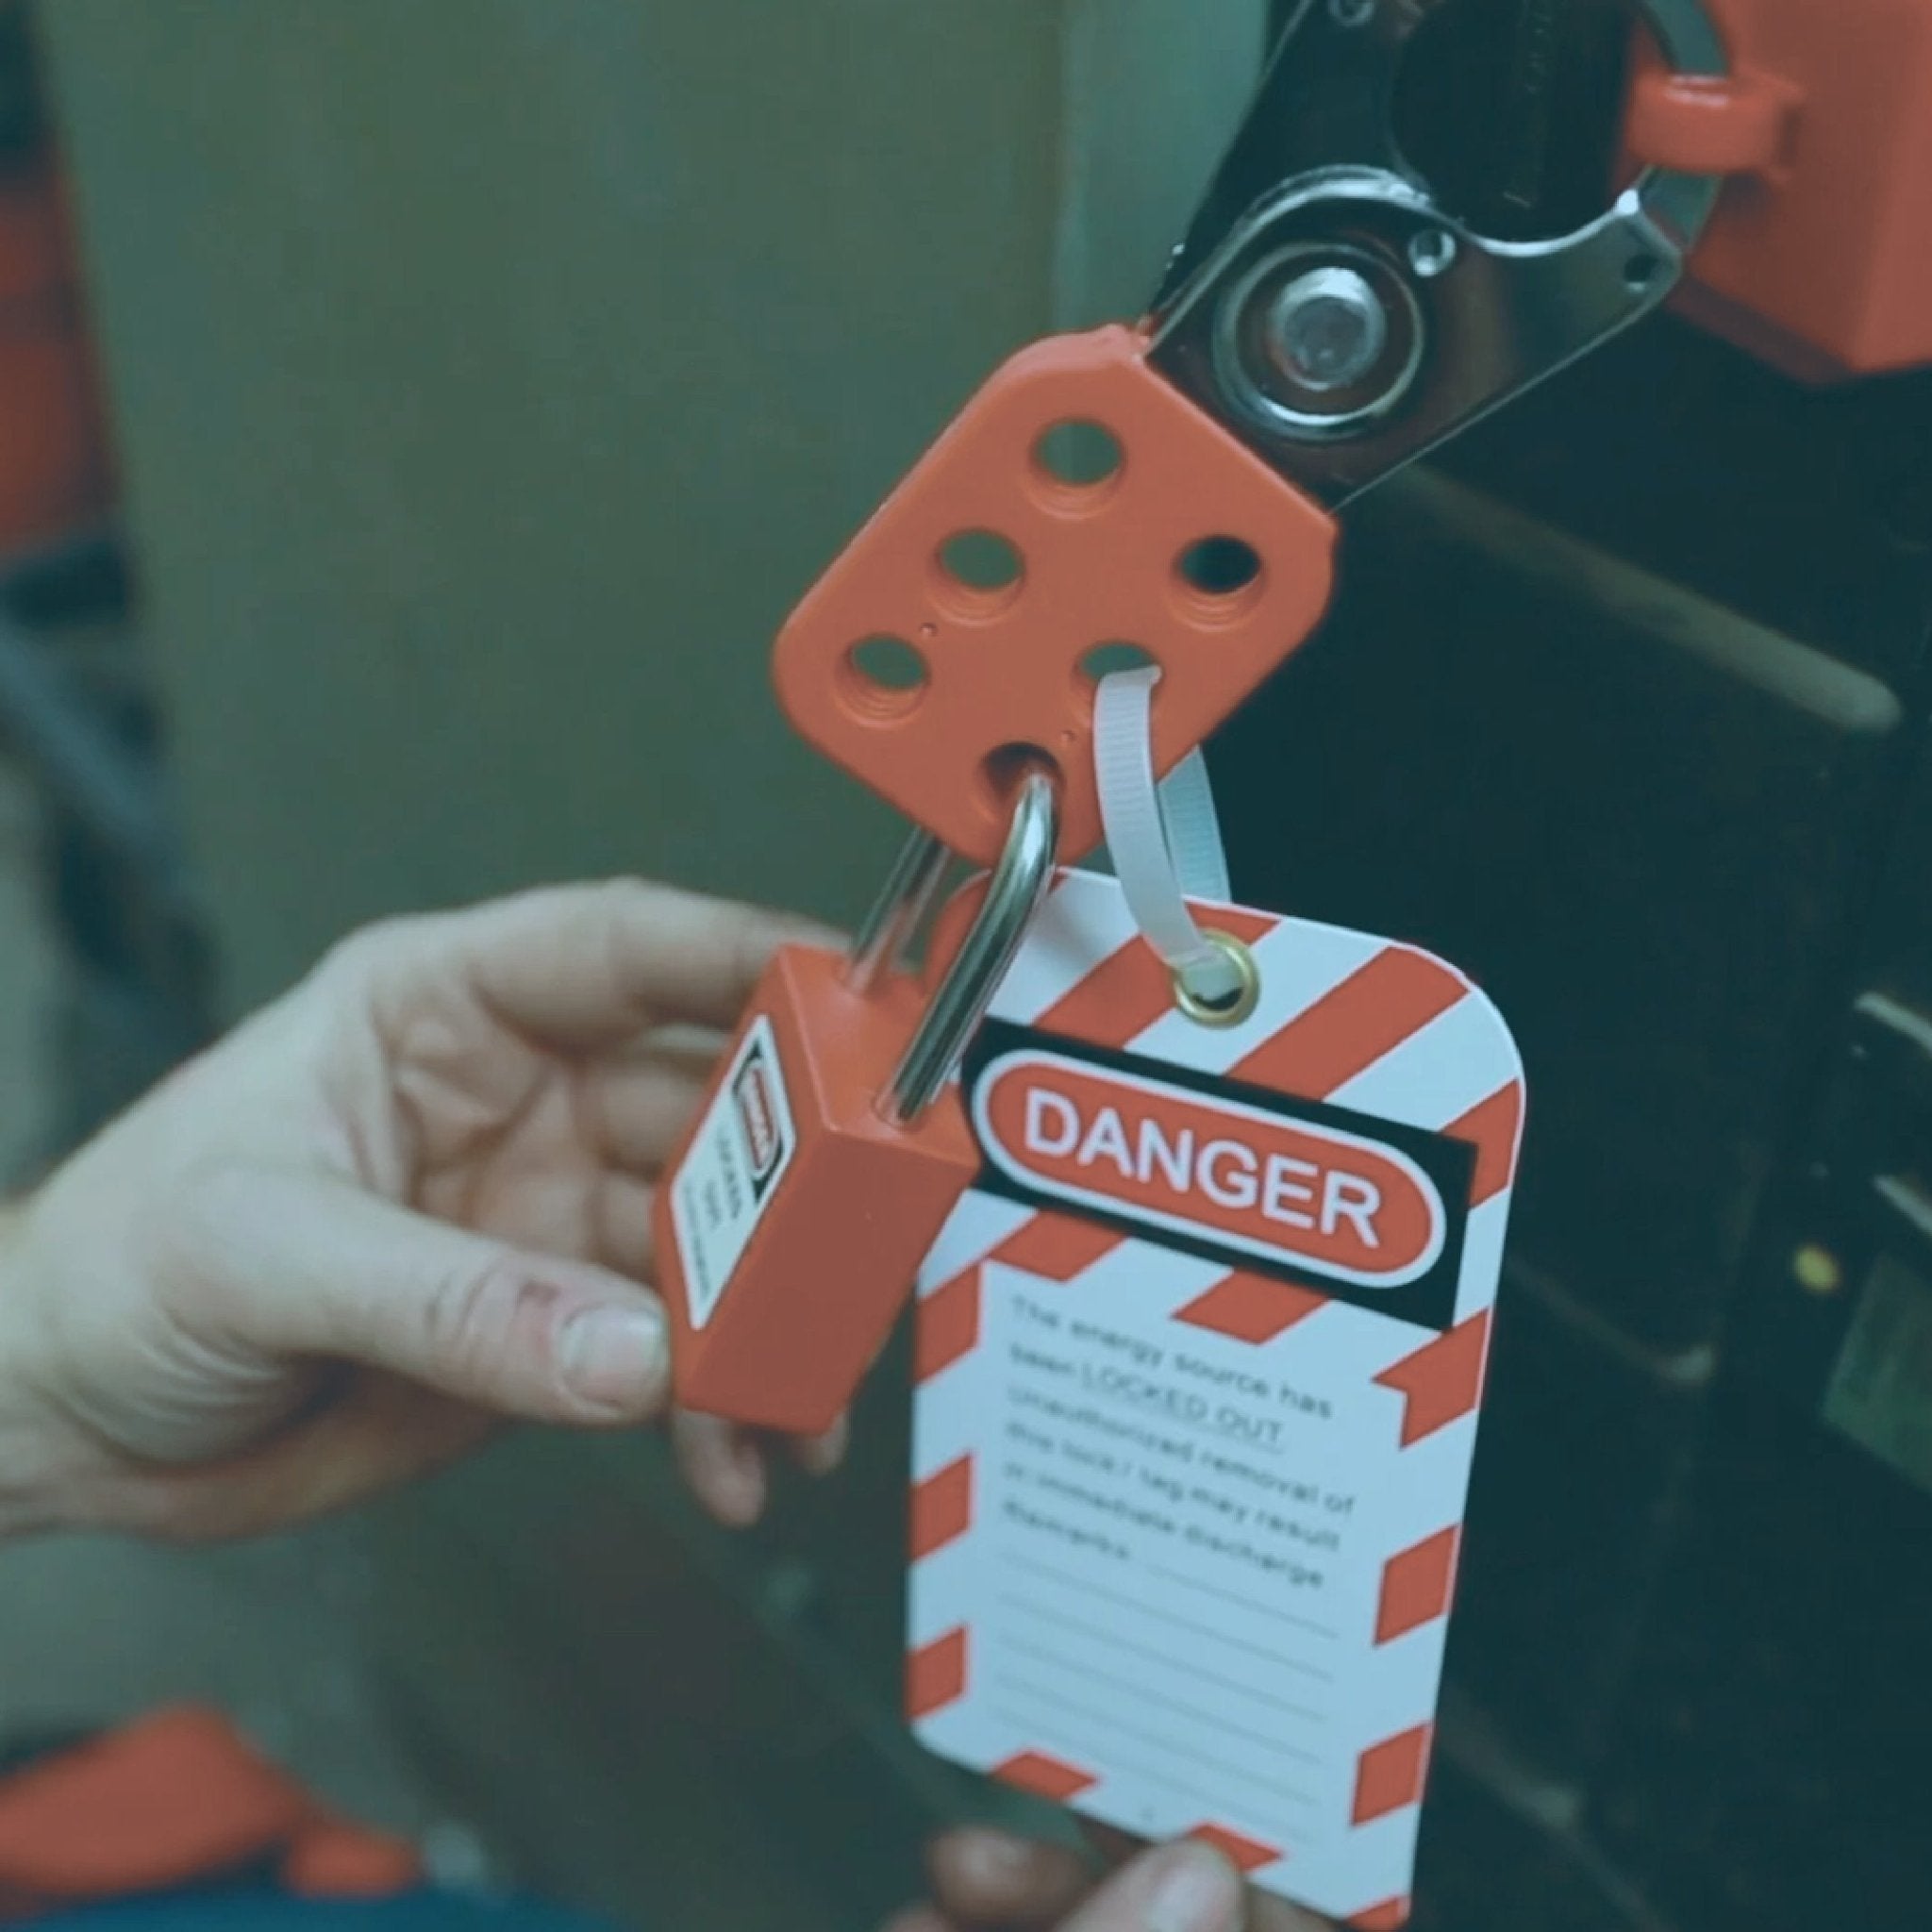 Tags & Lockout/Tagout Devices - CYANvisuals